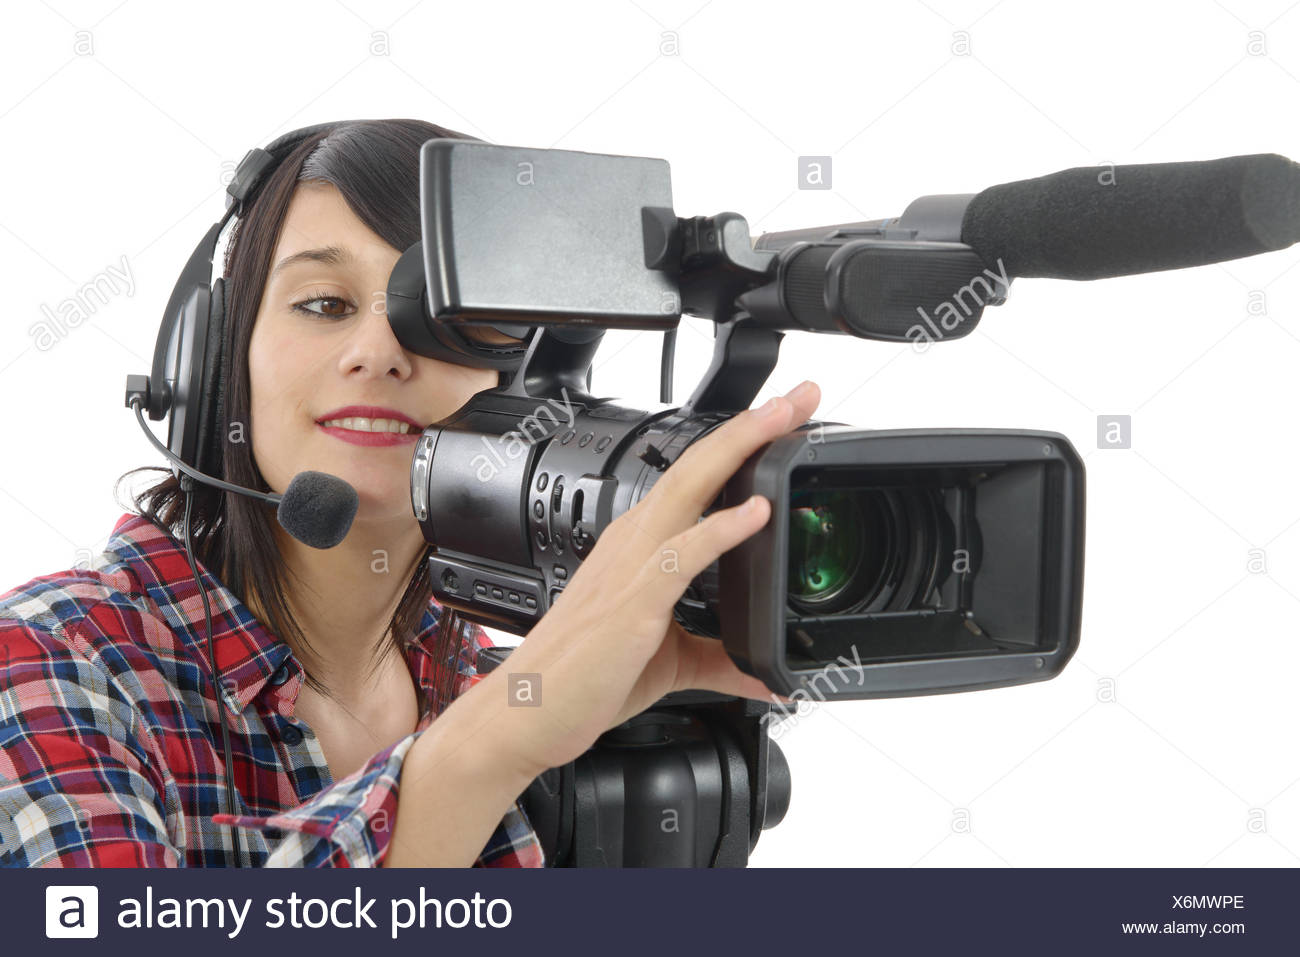 Girl with video camera